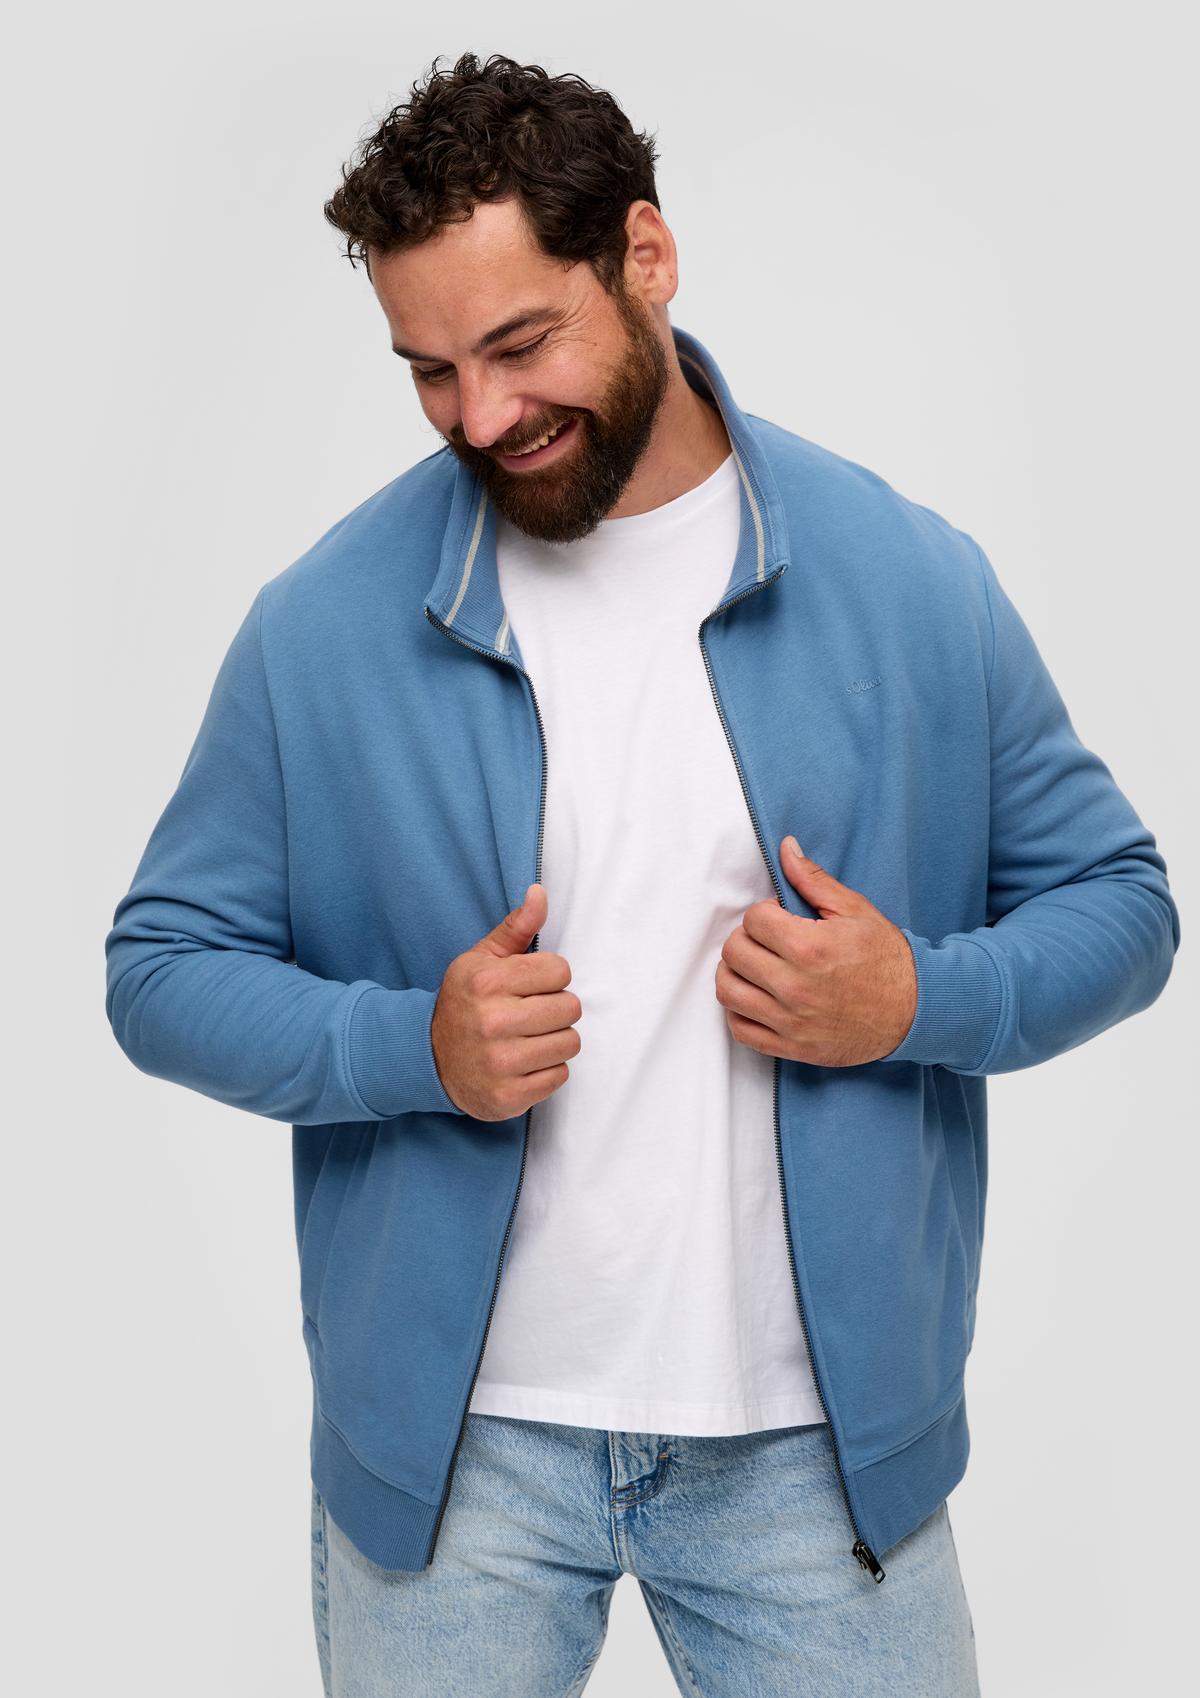 s.Oliver Sweatshirt jacket with a stand-up collar